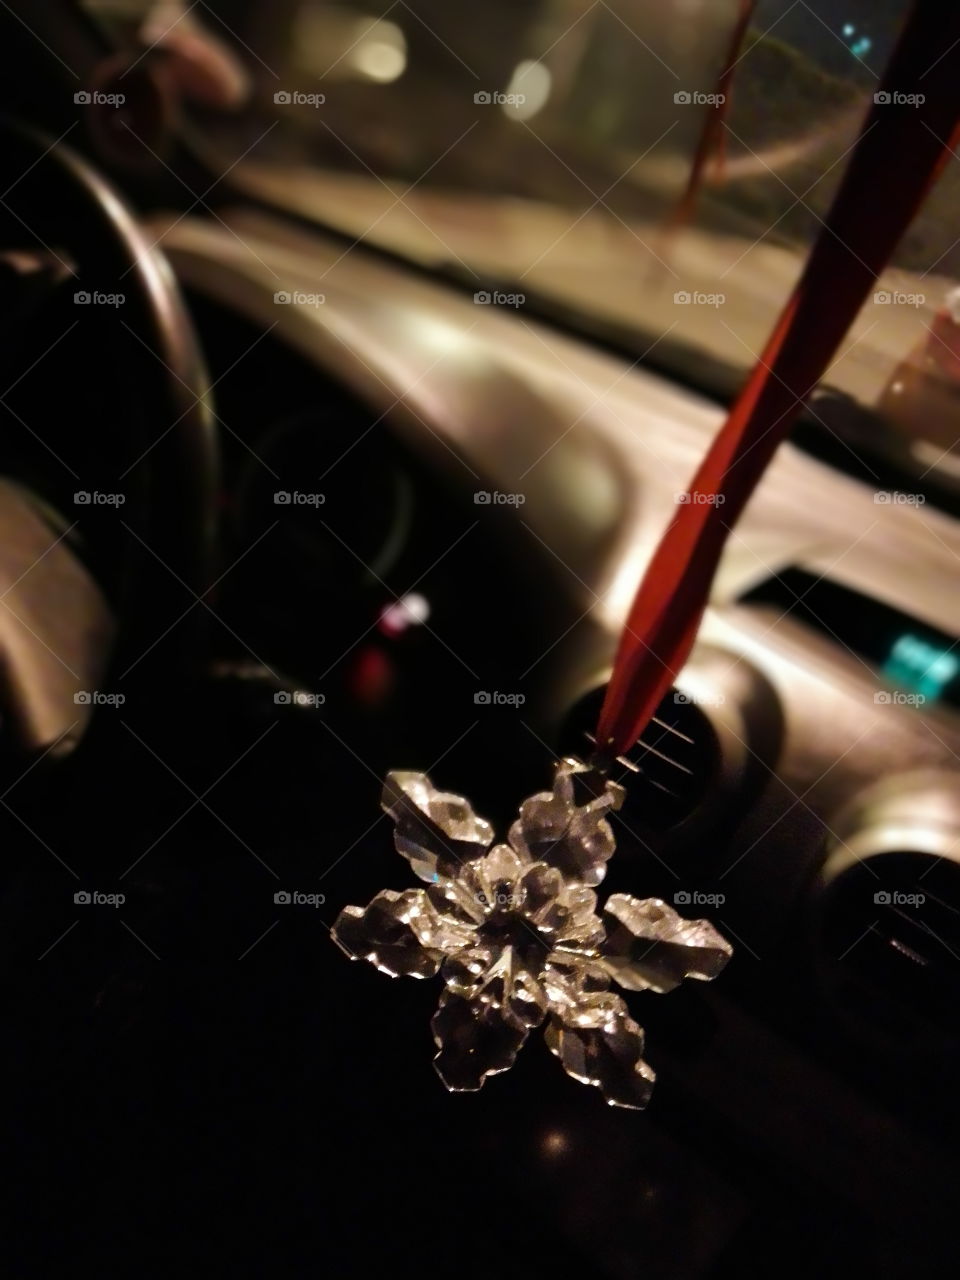 decoration in the car.